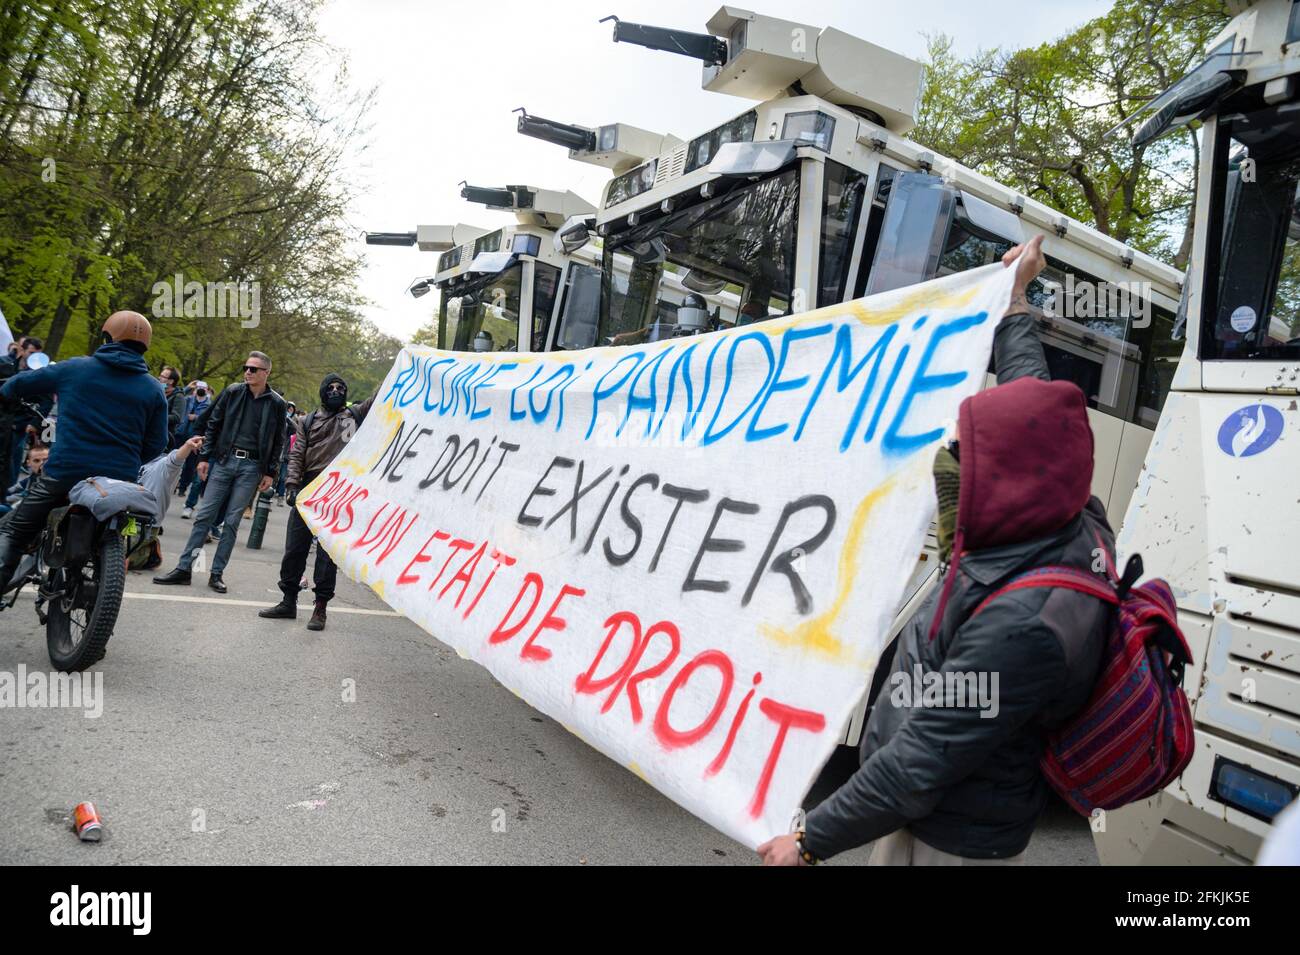 Belgium, Germany, May 1, 2021. People hold a sign reading 'None pandemic law must exist in the rule of law' in front of police cars during Boum 2 event in Brussels, Belgium on May 1, 2021. The Collectif Abime called for a second edition of La Boum, an illegal gathering to protest against the Covid19 mesures and happening in Le Bois de la Cambre in Brussels. Photo by Julie Sebadelha/ABACAPRESS.COM Stock Photo